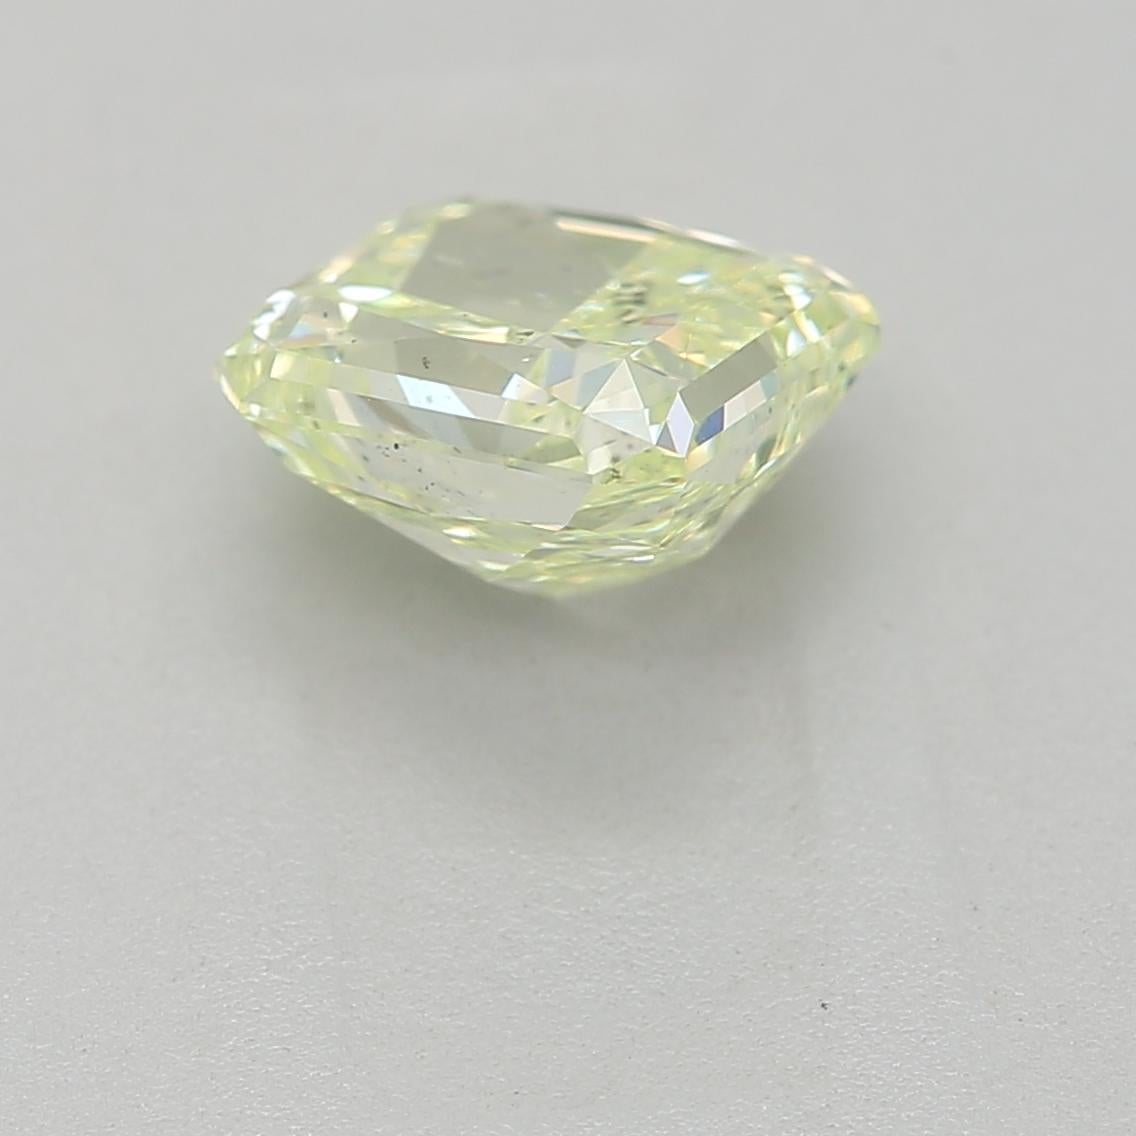 Radiant Cut 1.02-CARAT, FANCY YELLOW GREEN, Radiant, SI2-CLARITY, GIA , SKU-7549 For Sale